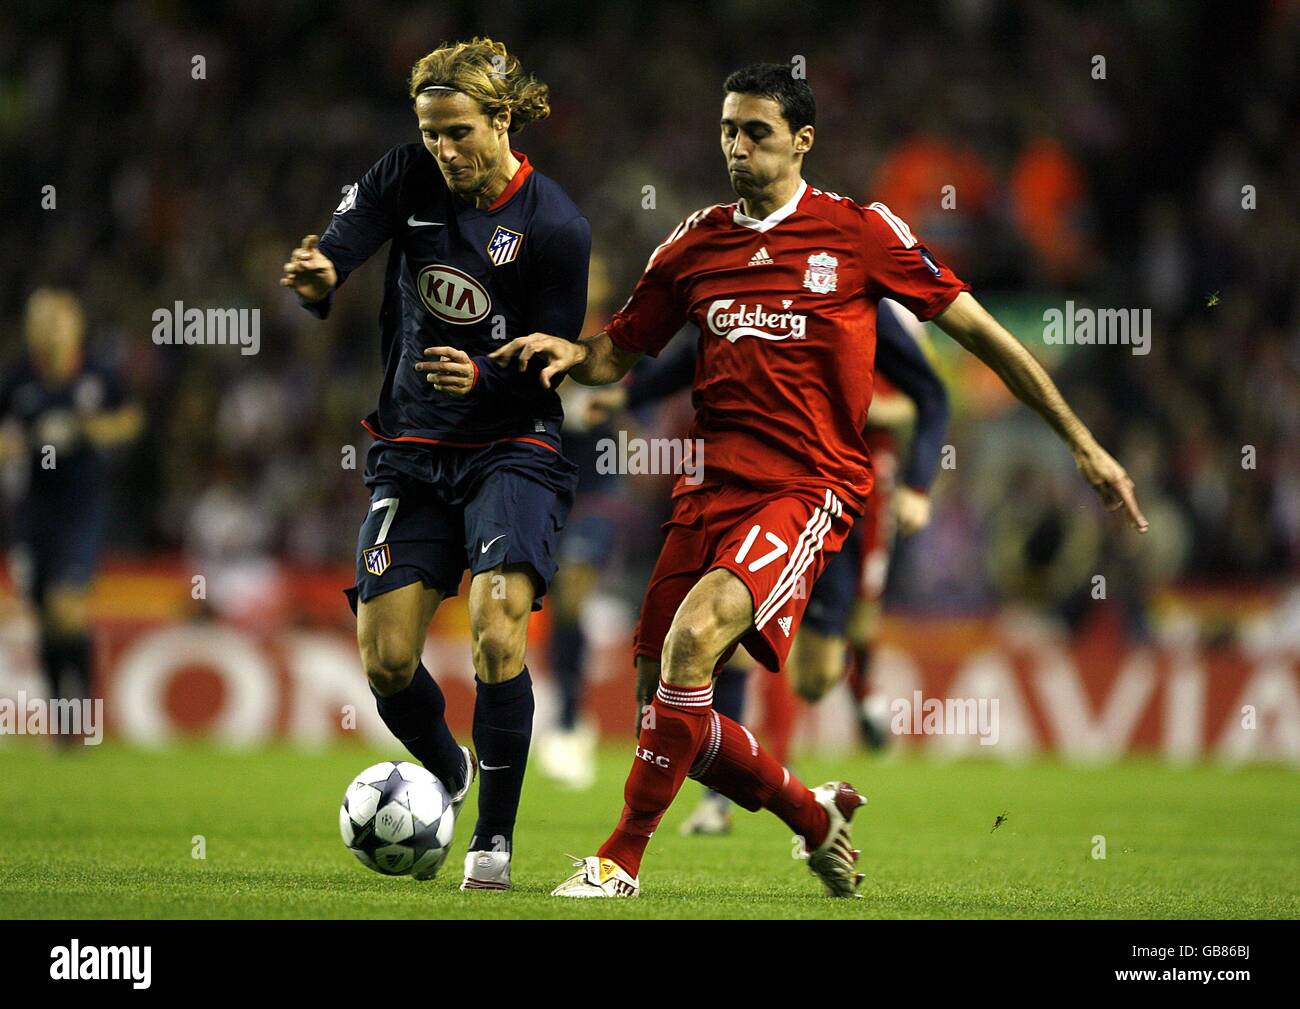 Soccer - UEFA Champions League - Group D - Liverpool v Atletico Madrid - Anfield. Atletico Madrid's Diego Forlan (l) and Liverpool's Alvaro Arbeloa battle for the ball Stock Photo